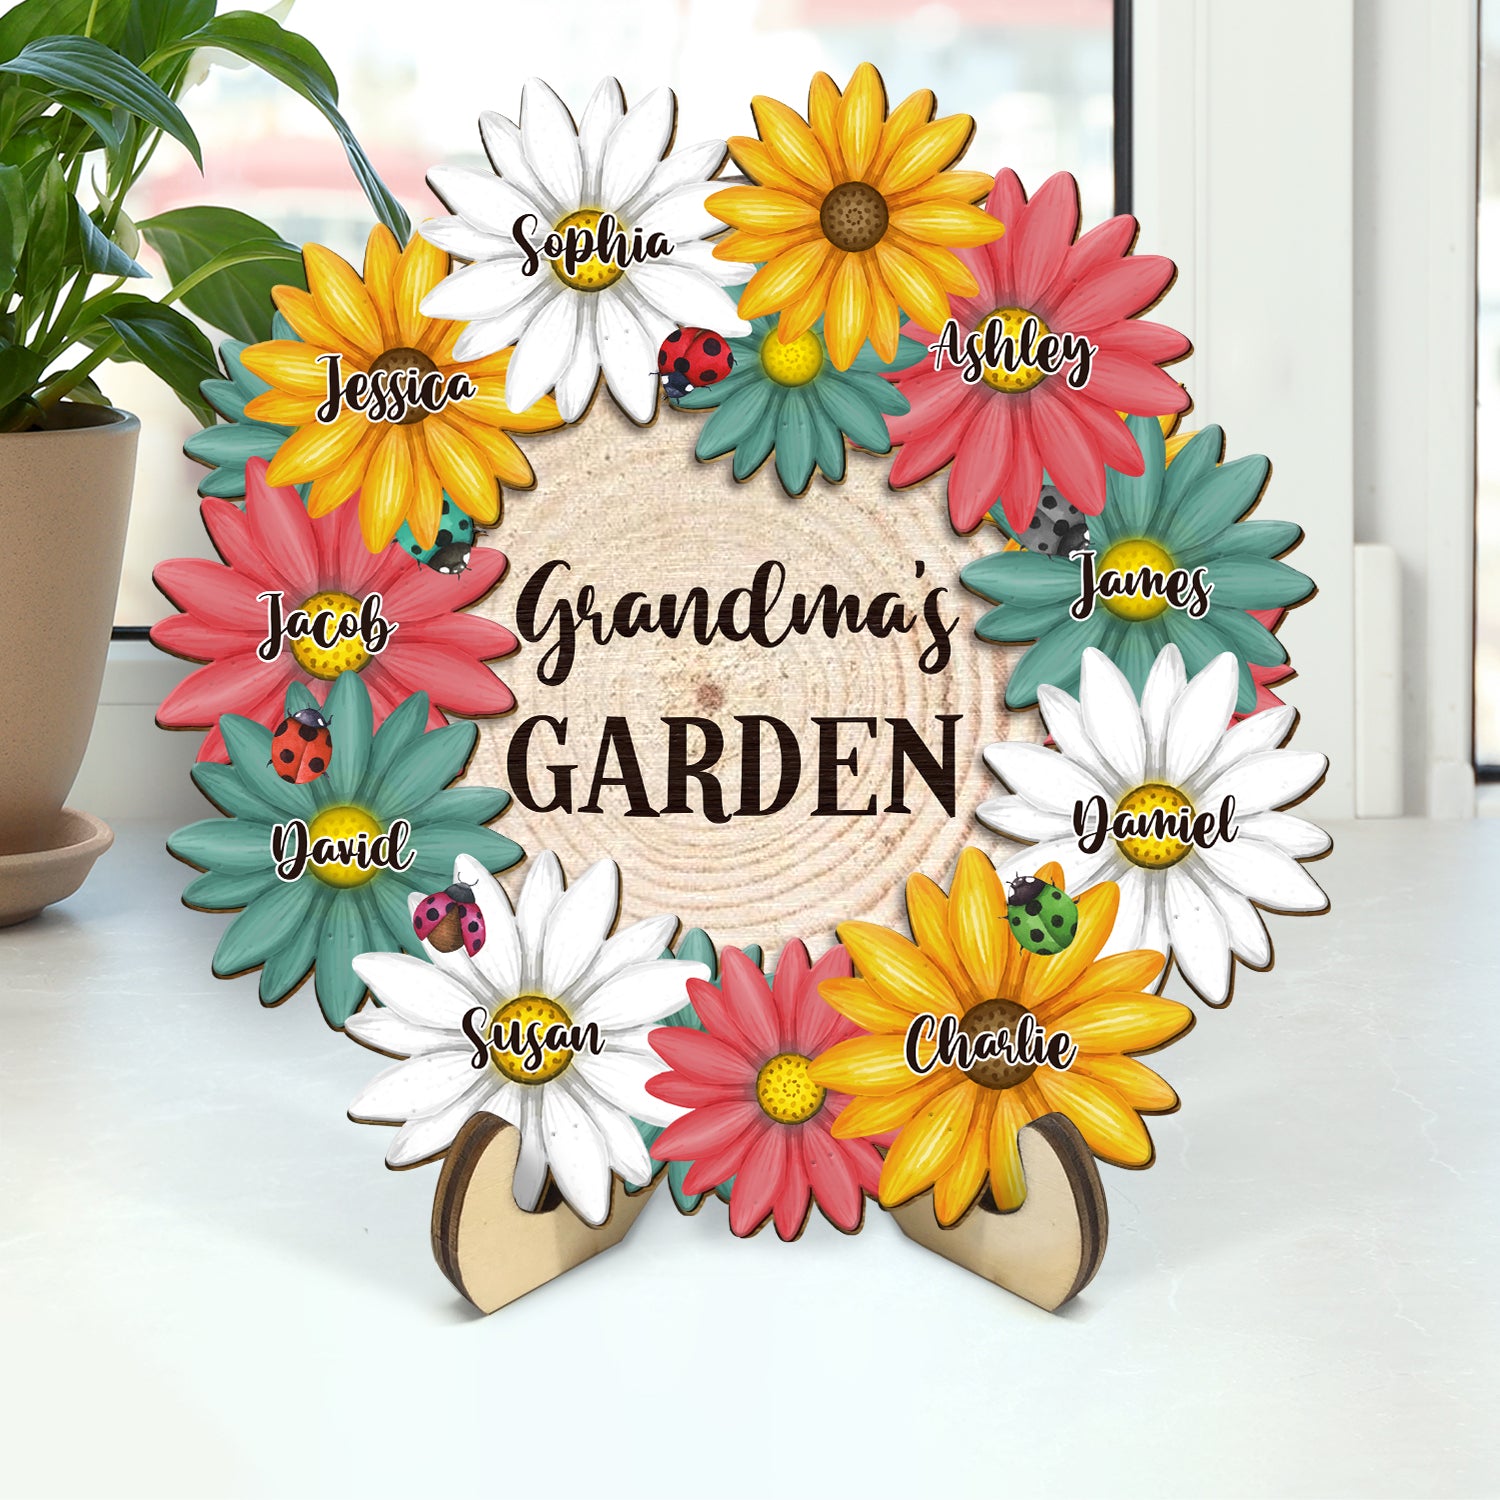 Grandma's Garden - Gift For Mom, Mother, Grandma, Nana - Personalized 2-Layered Wooden Plaque With Stand